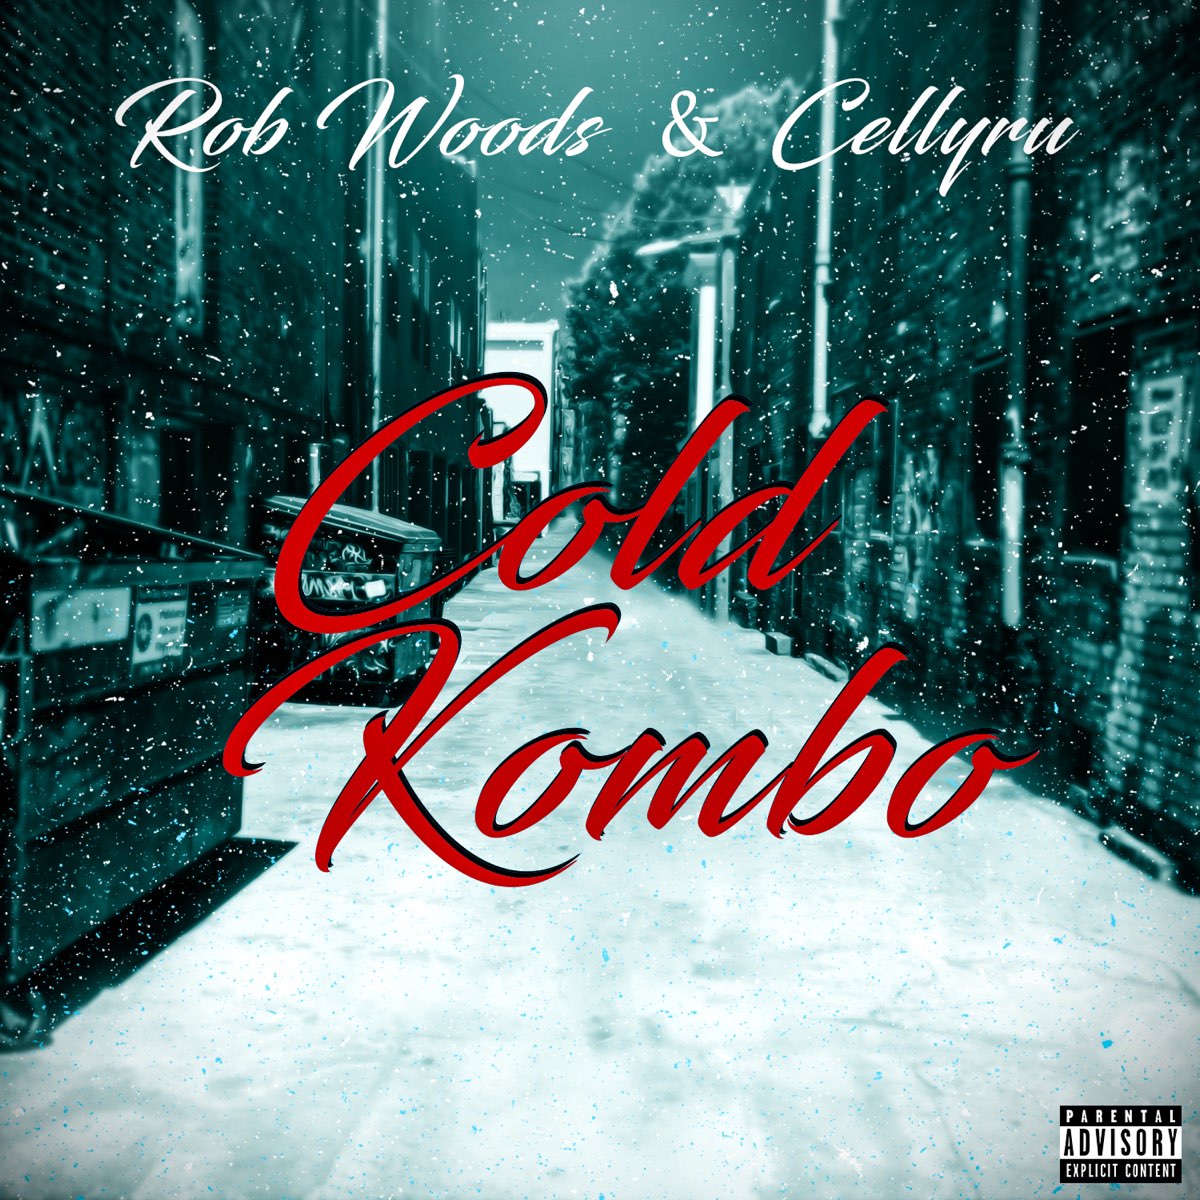 Rob Woods & Celly Ru - Cold Kombo